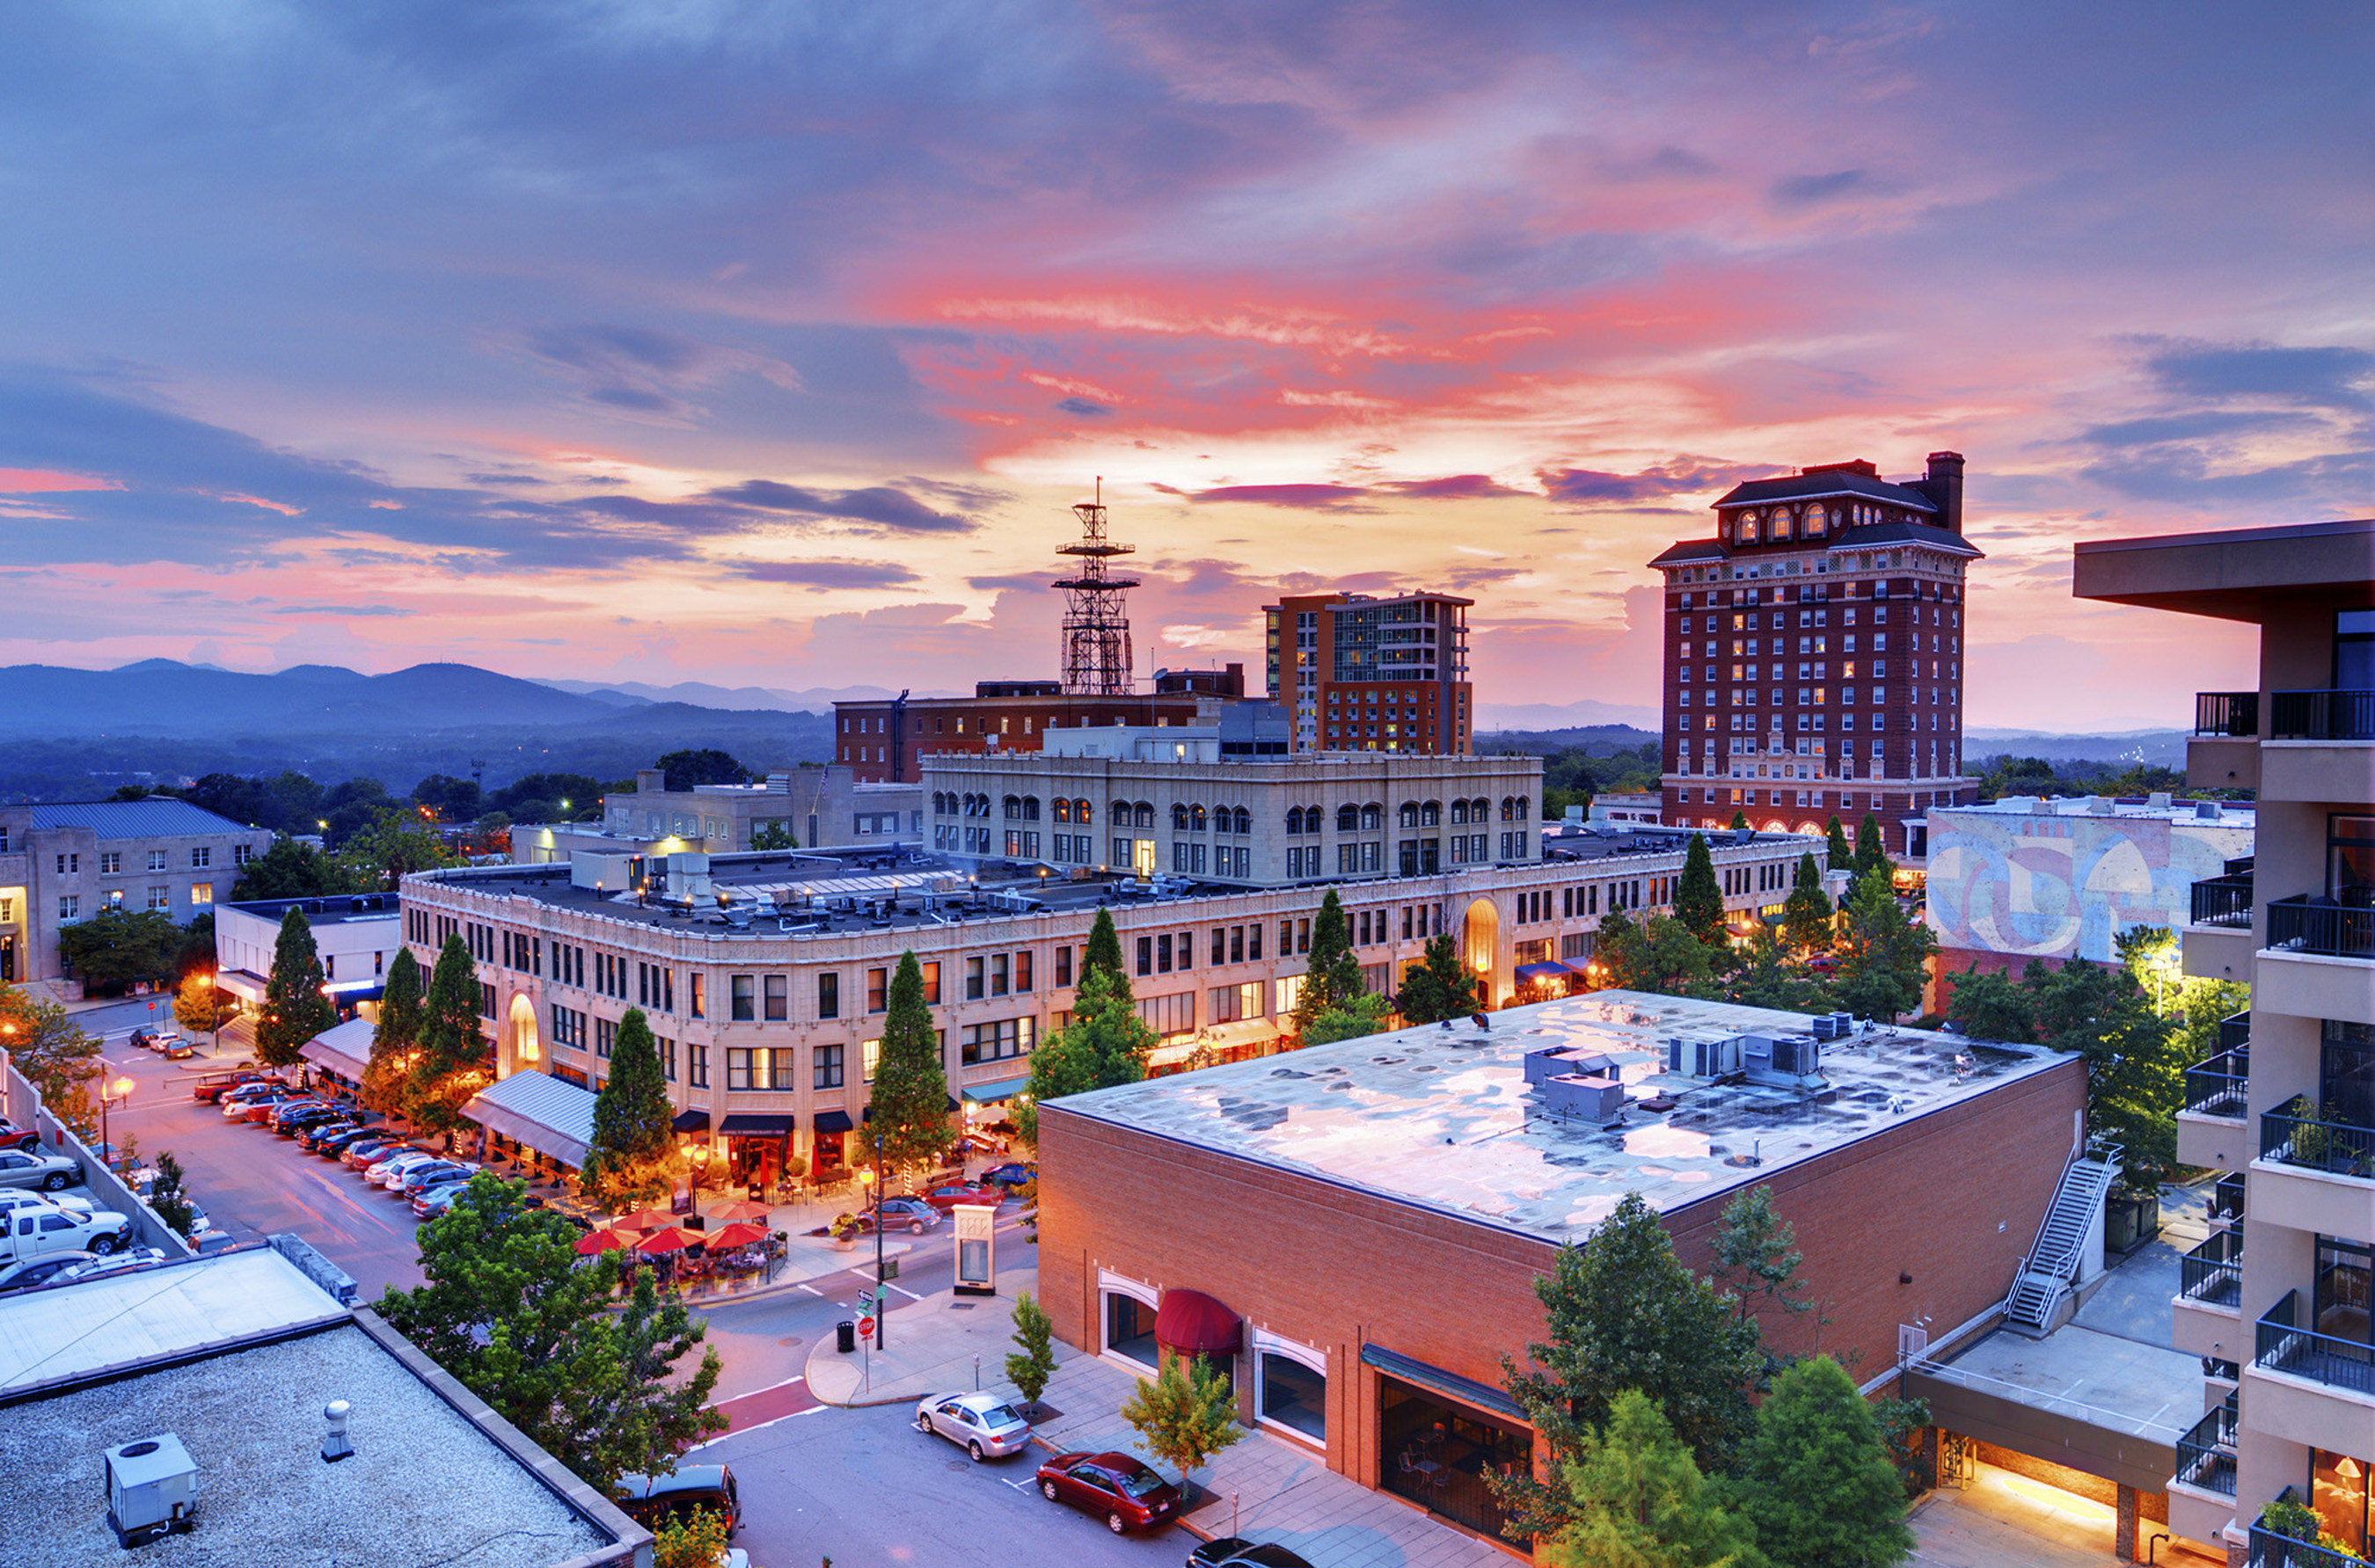 Booking.com Reveals The Top 7 Emerging Food Capitals In The US - Asheville, North Carolina (PRNewsFoto/Booking.com) (PRNewsFoto/Booking.com)